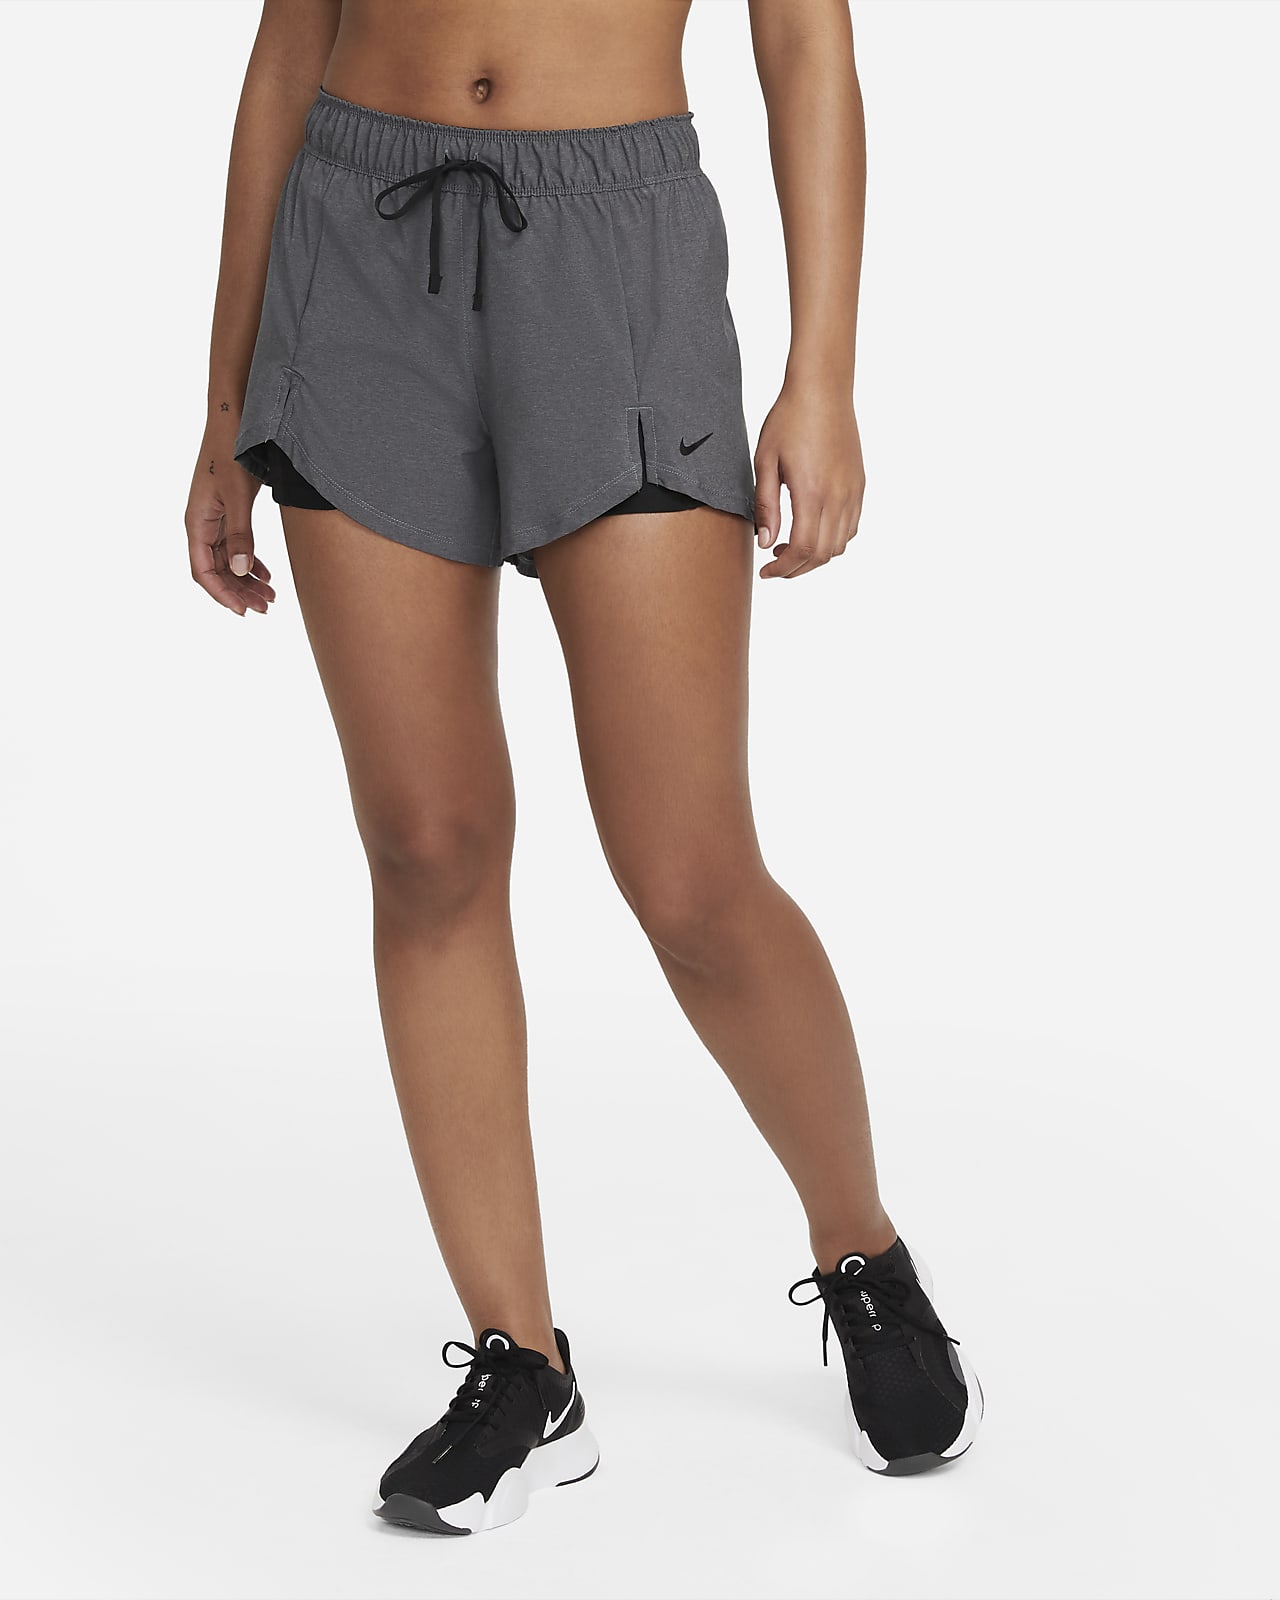 https://static.nike.com/a/images/t_PDP_1280_v1/f_auto,q_auto:eco/b02f9dec-e6b3-4795-b9c0-aaf9466c8c29/shorts-de-entrenamiento-flex-essential-2-in-1-72HsjD.png